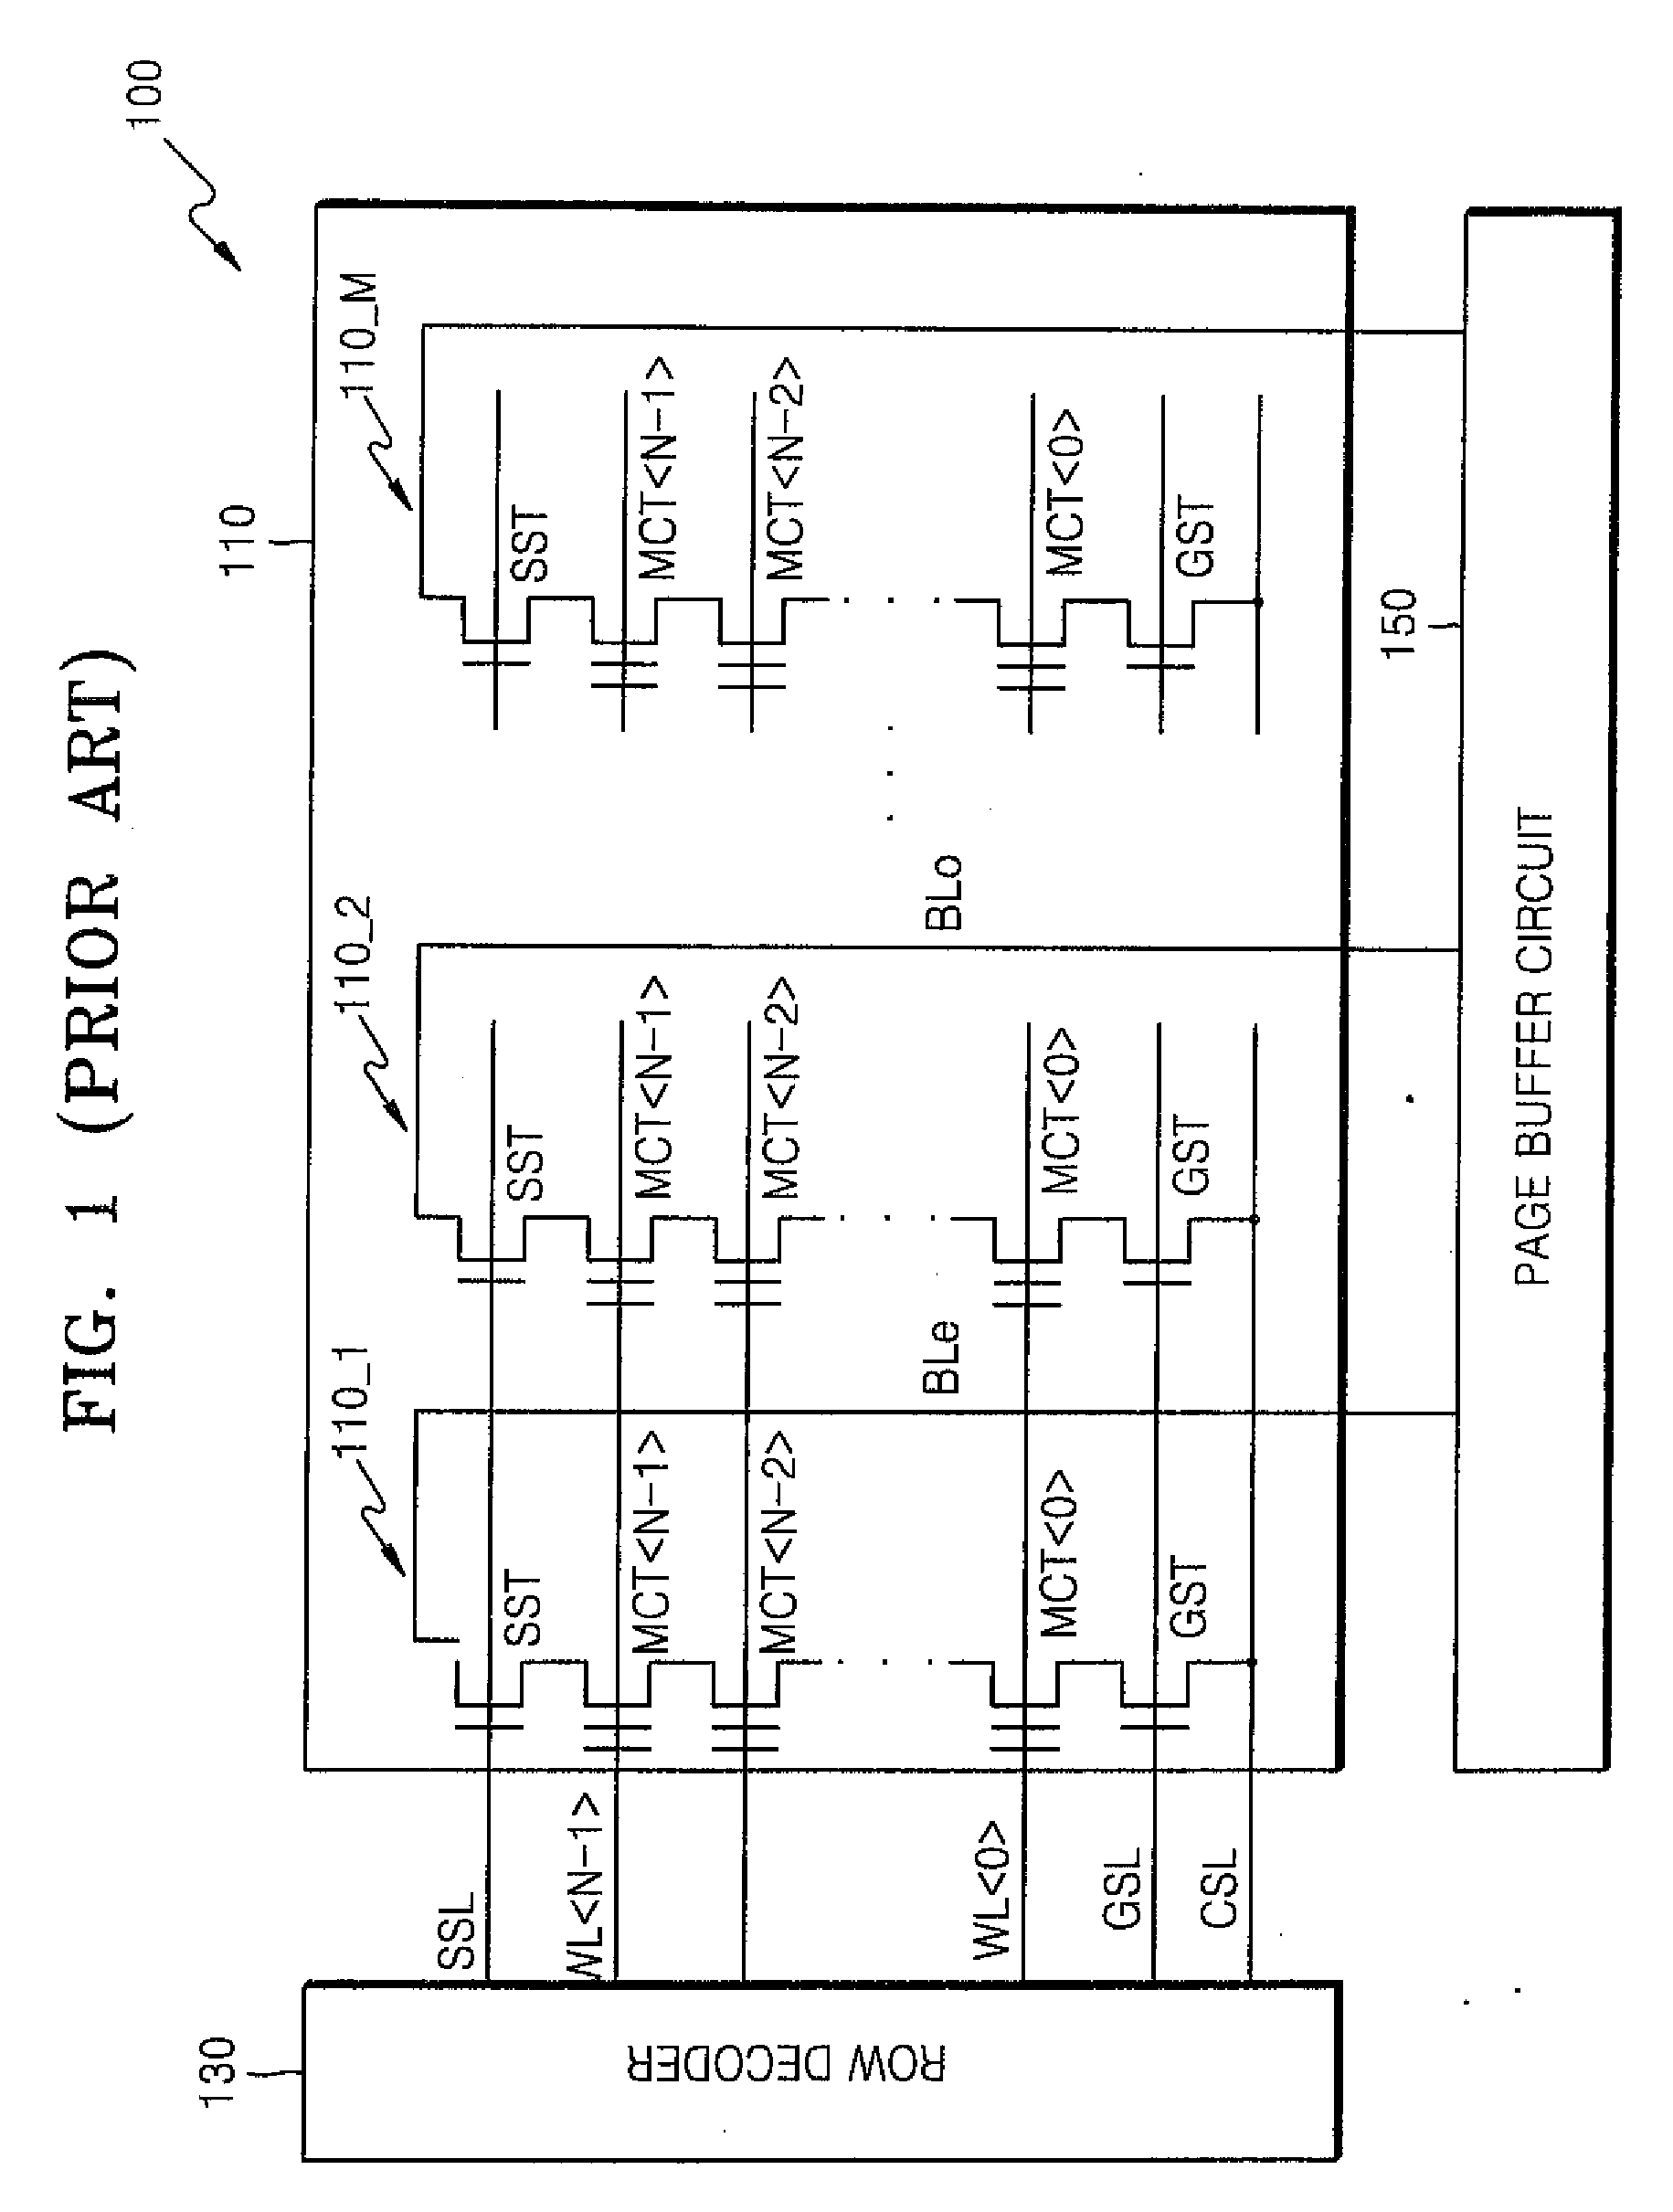 Method of programming a nonvolatile memory device using hybrid local boosting